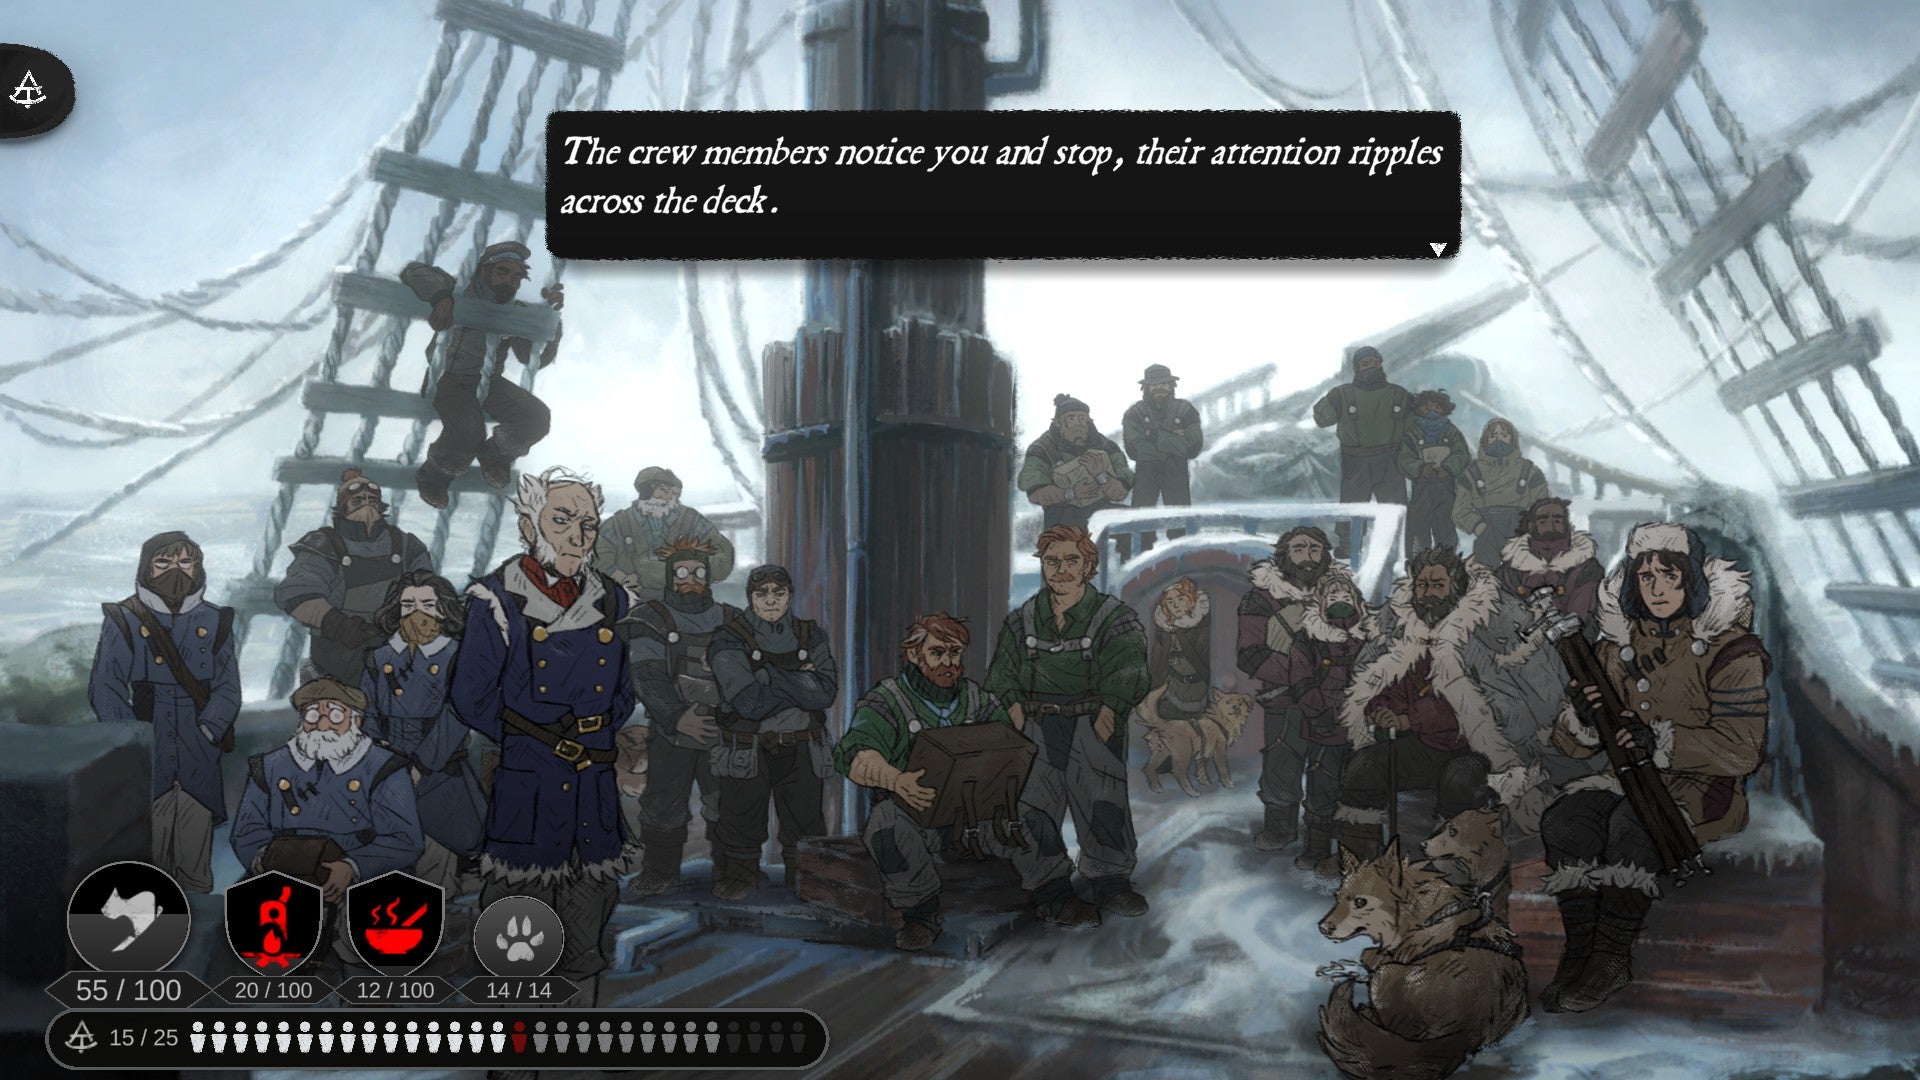 The crew gathers on the deck of the steamship of The Pale Beyond